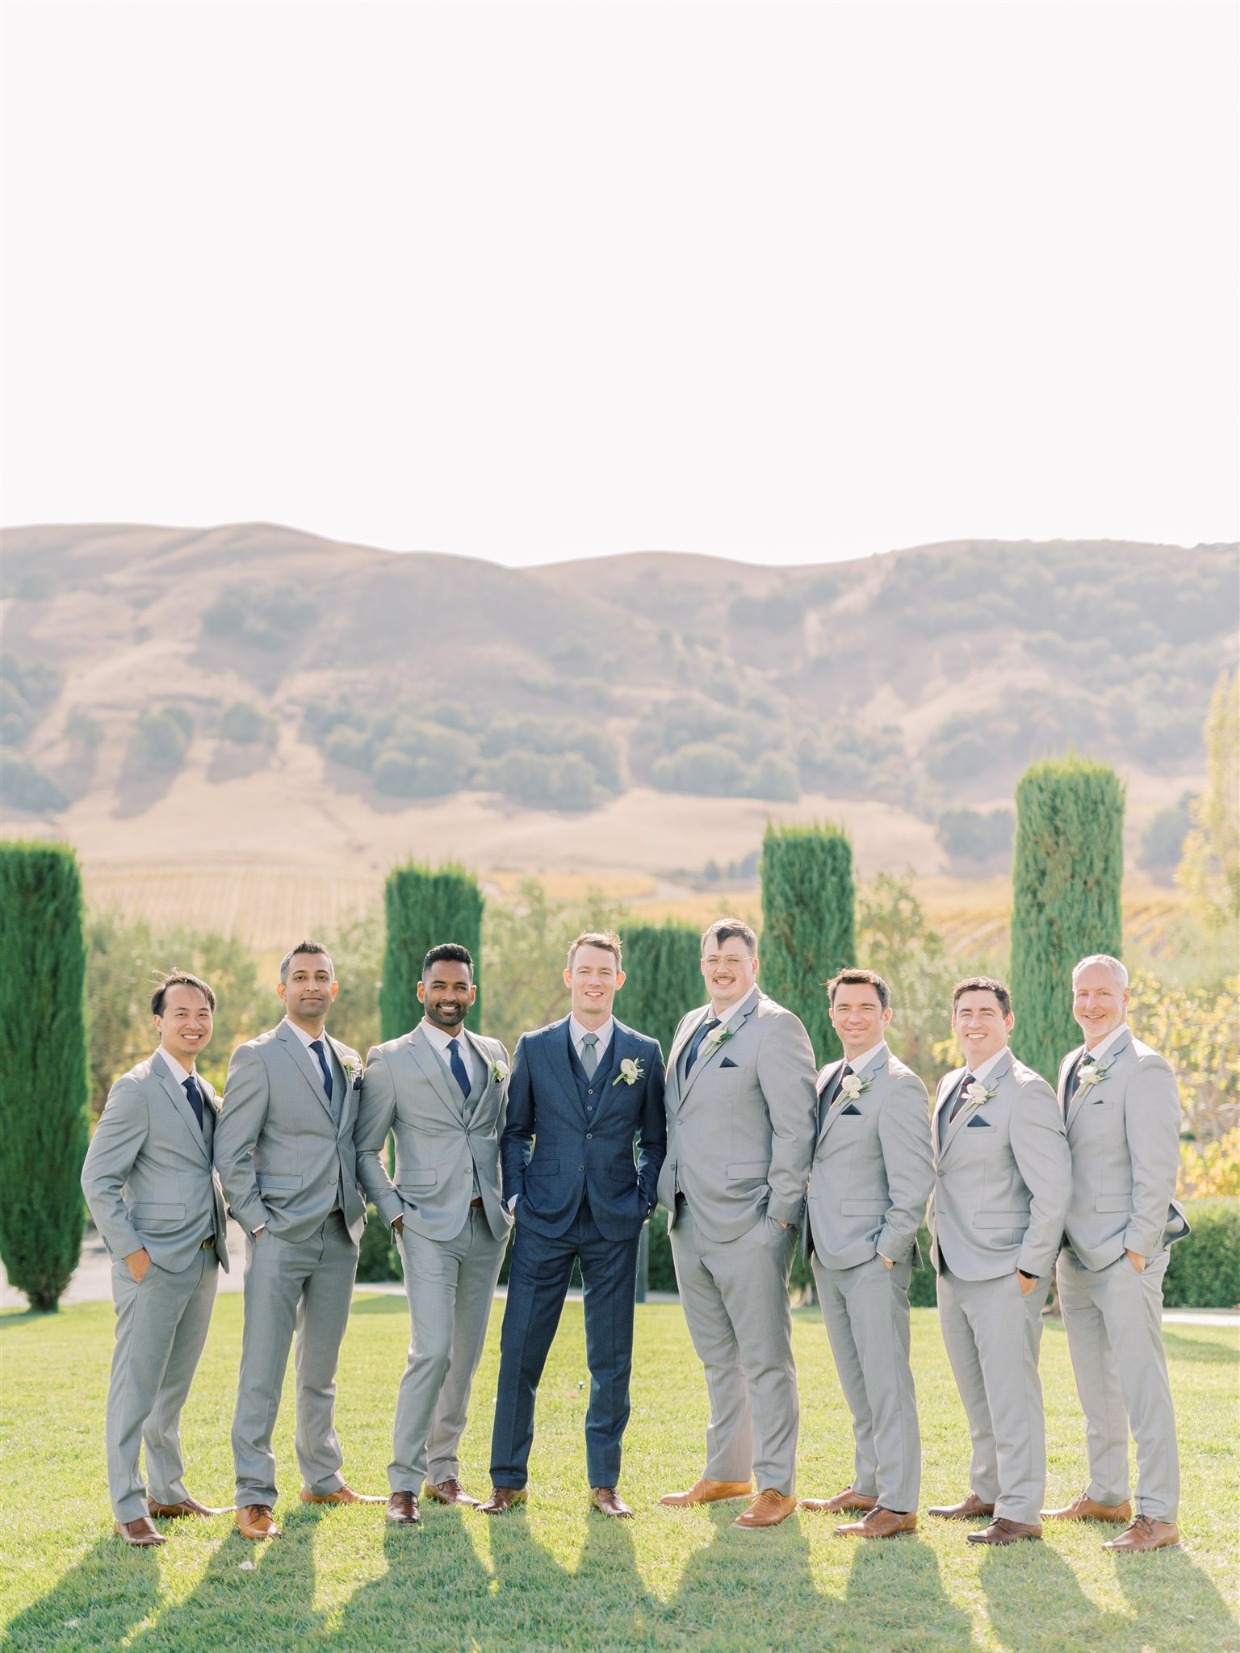 light gray and navy wedding suits from the modern groom